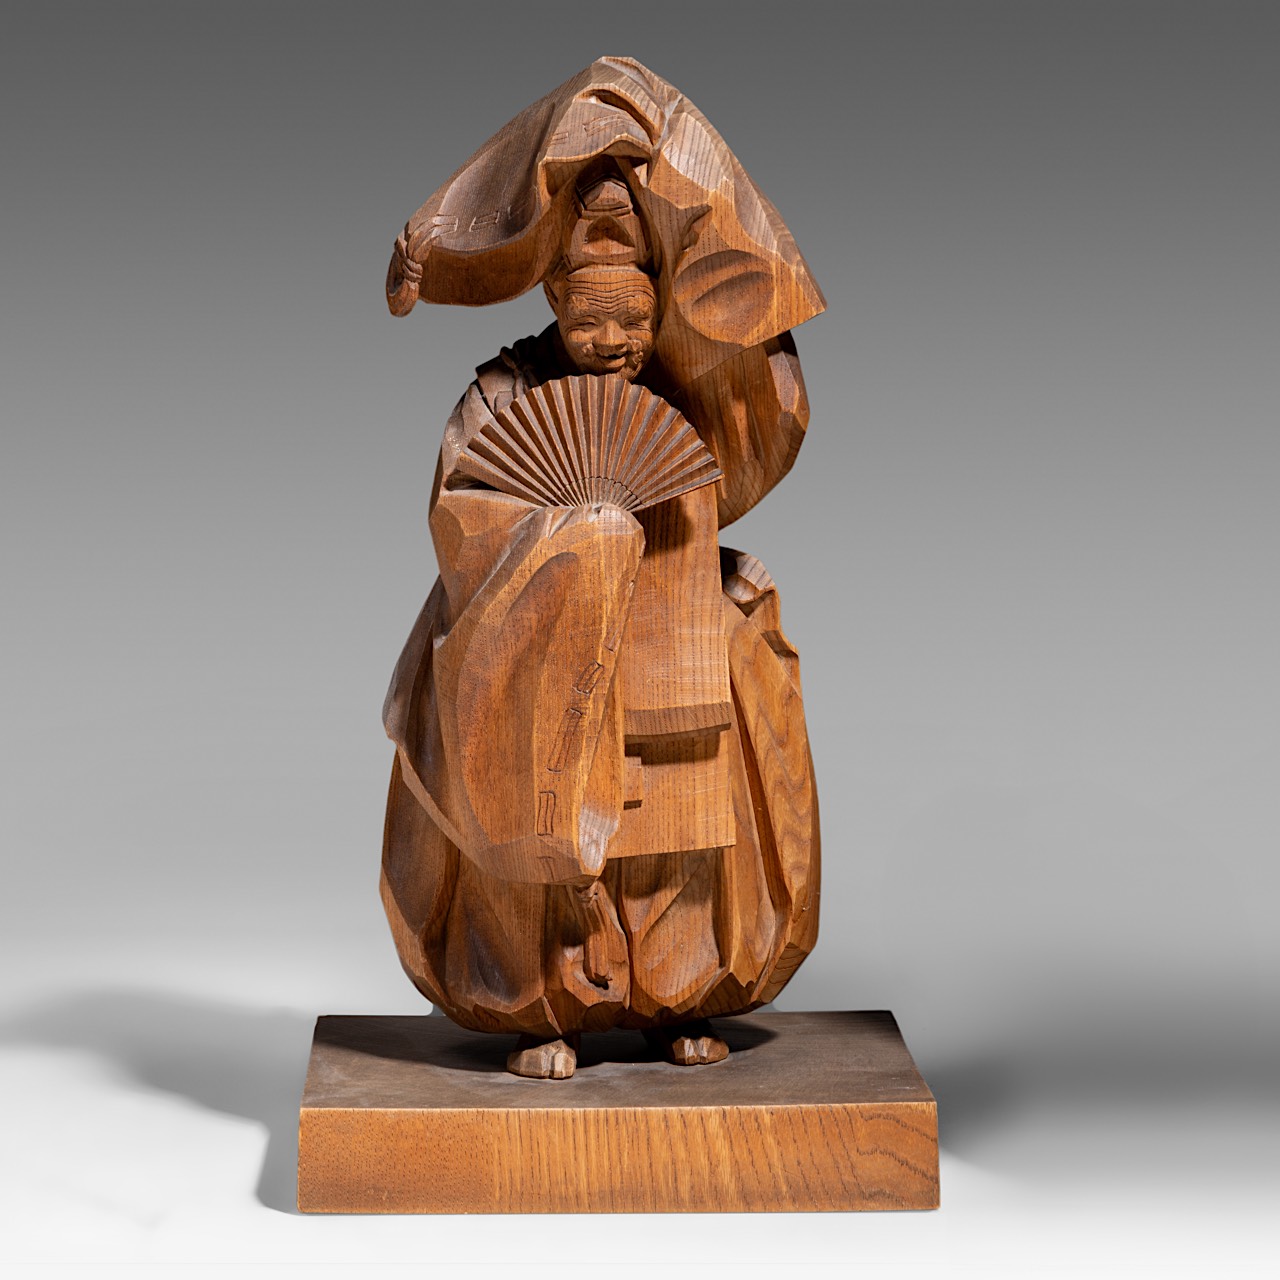 A Japanese cherrywood sculpture of a dancing man, signed Toshiaki Shimamura, total H 47 - 25,5 x 23 - Image 8 of 10